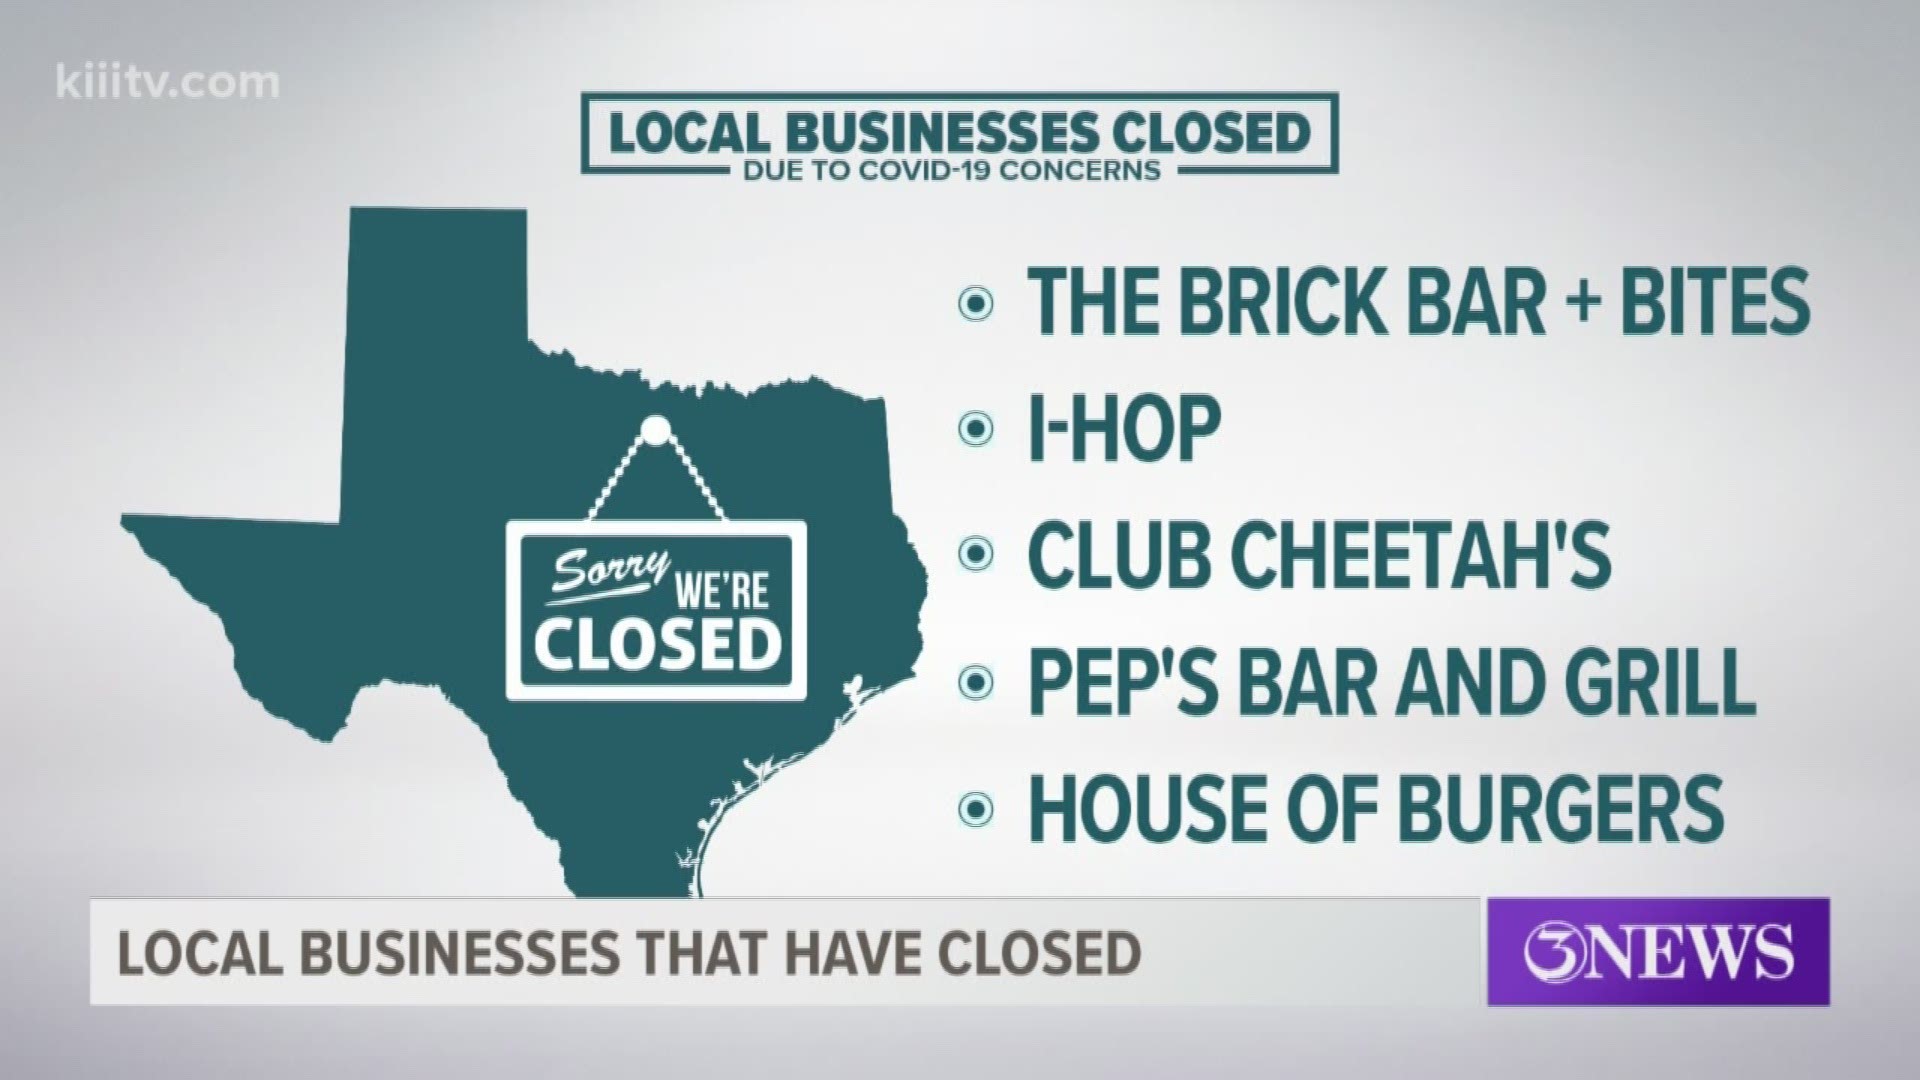 A few businesses have shut down all or part of their operations temporarily.